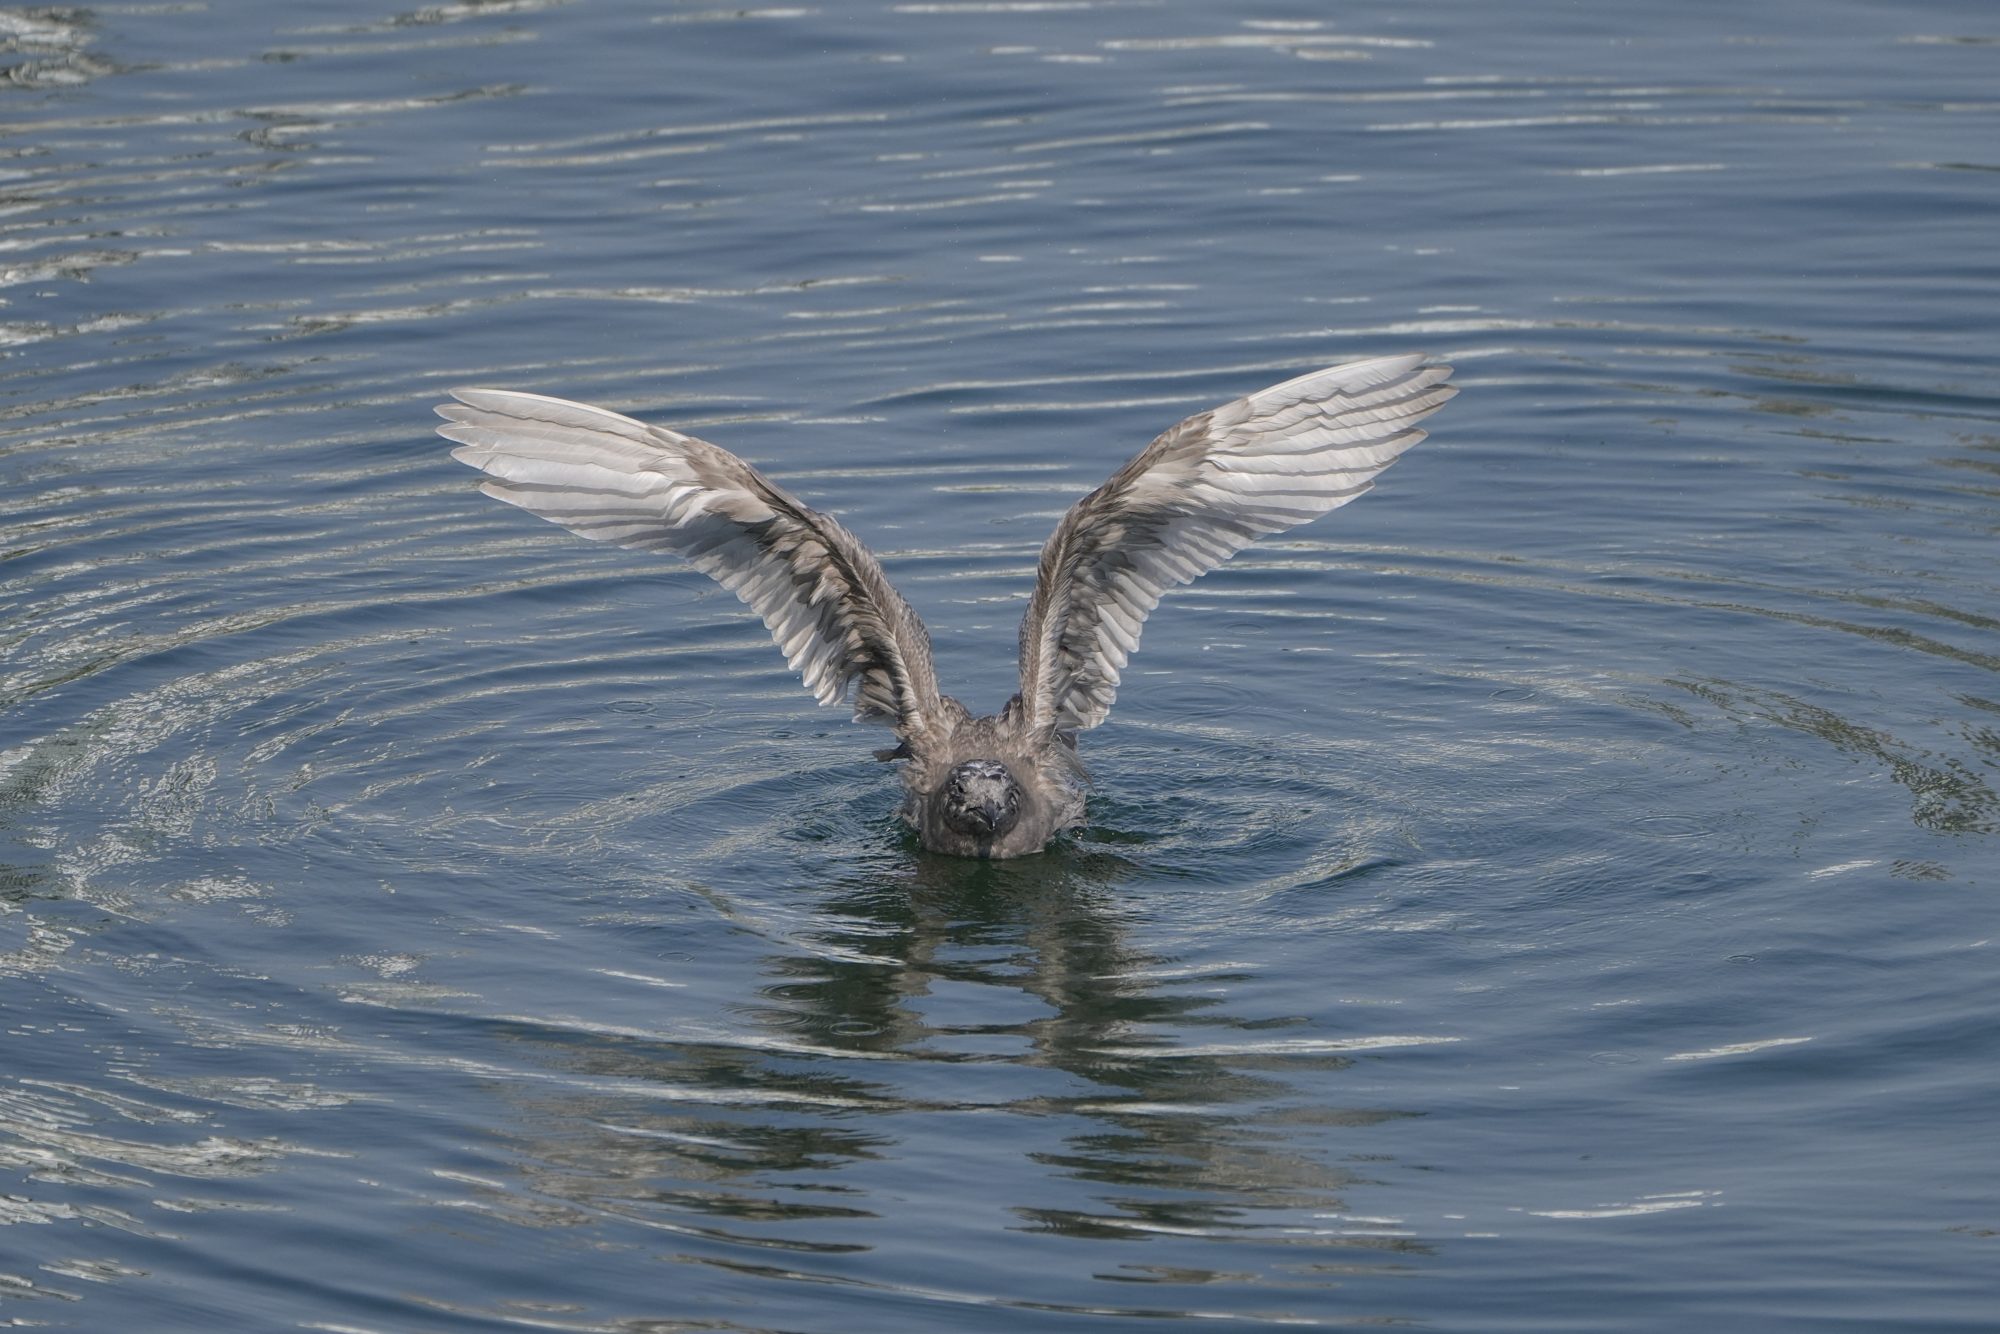 An immature Glaucous-winged Gull on the water, laying down and flapping its wings